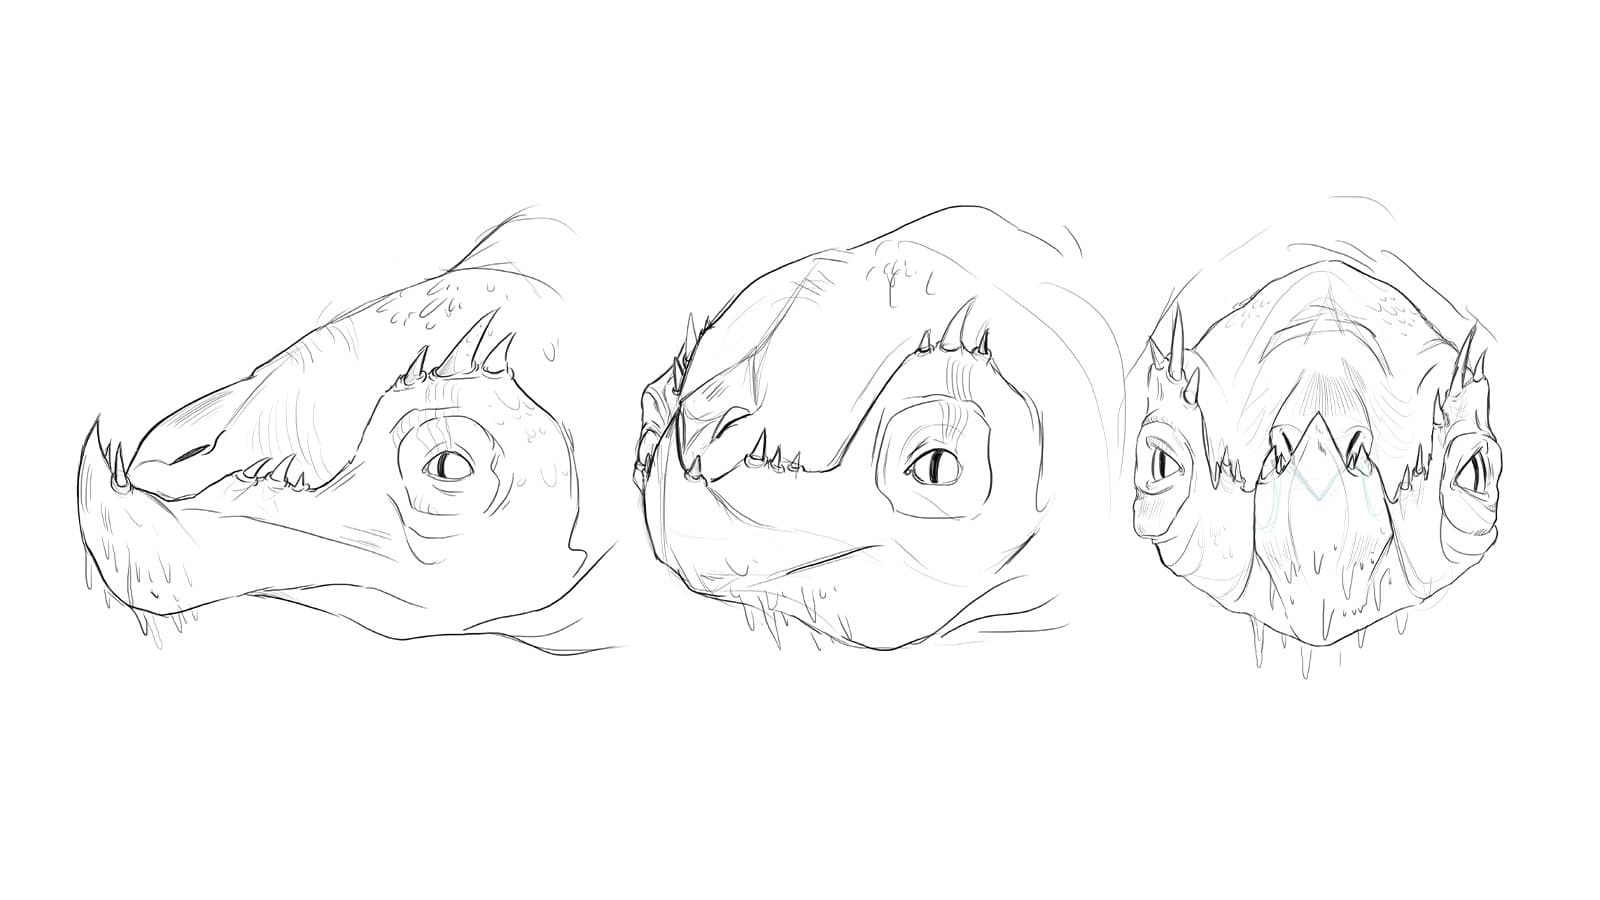 A face turnaround of the big monster